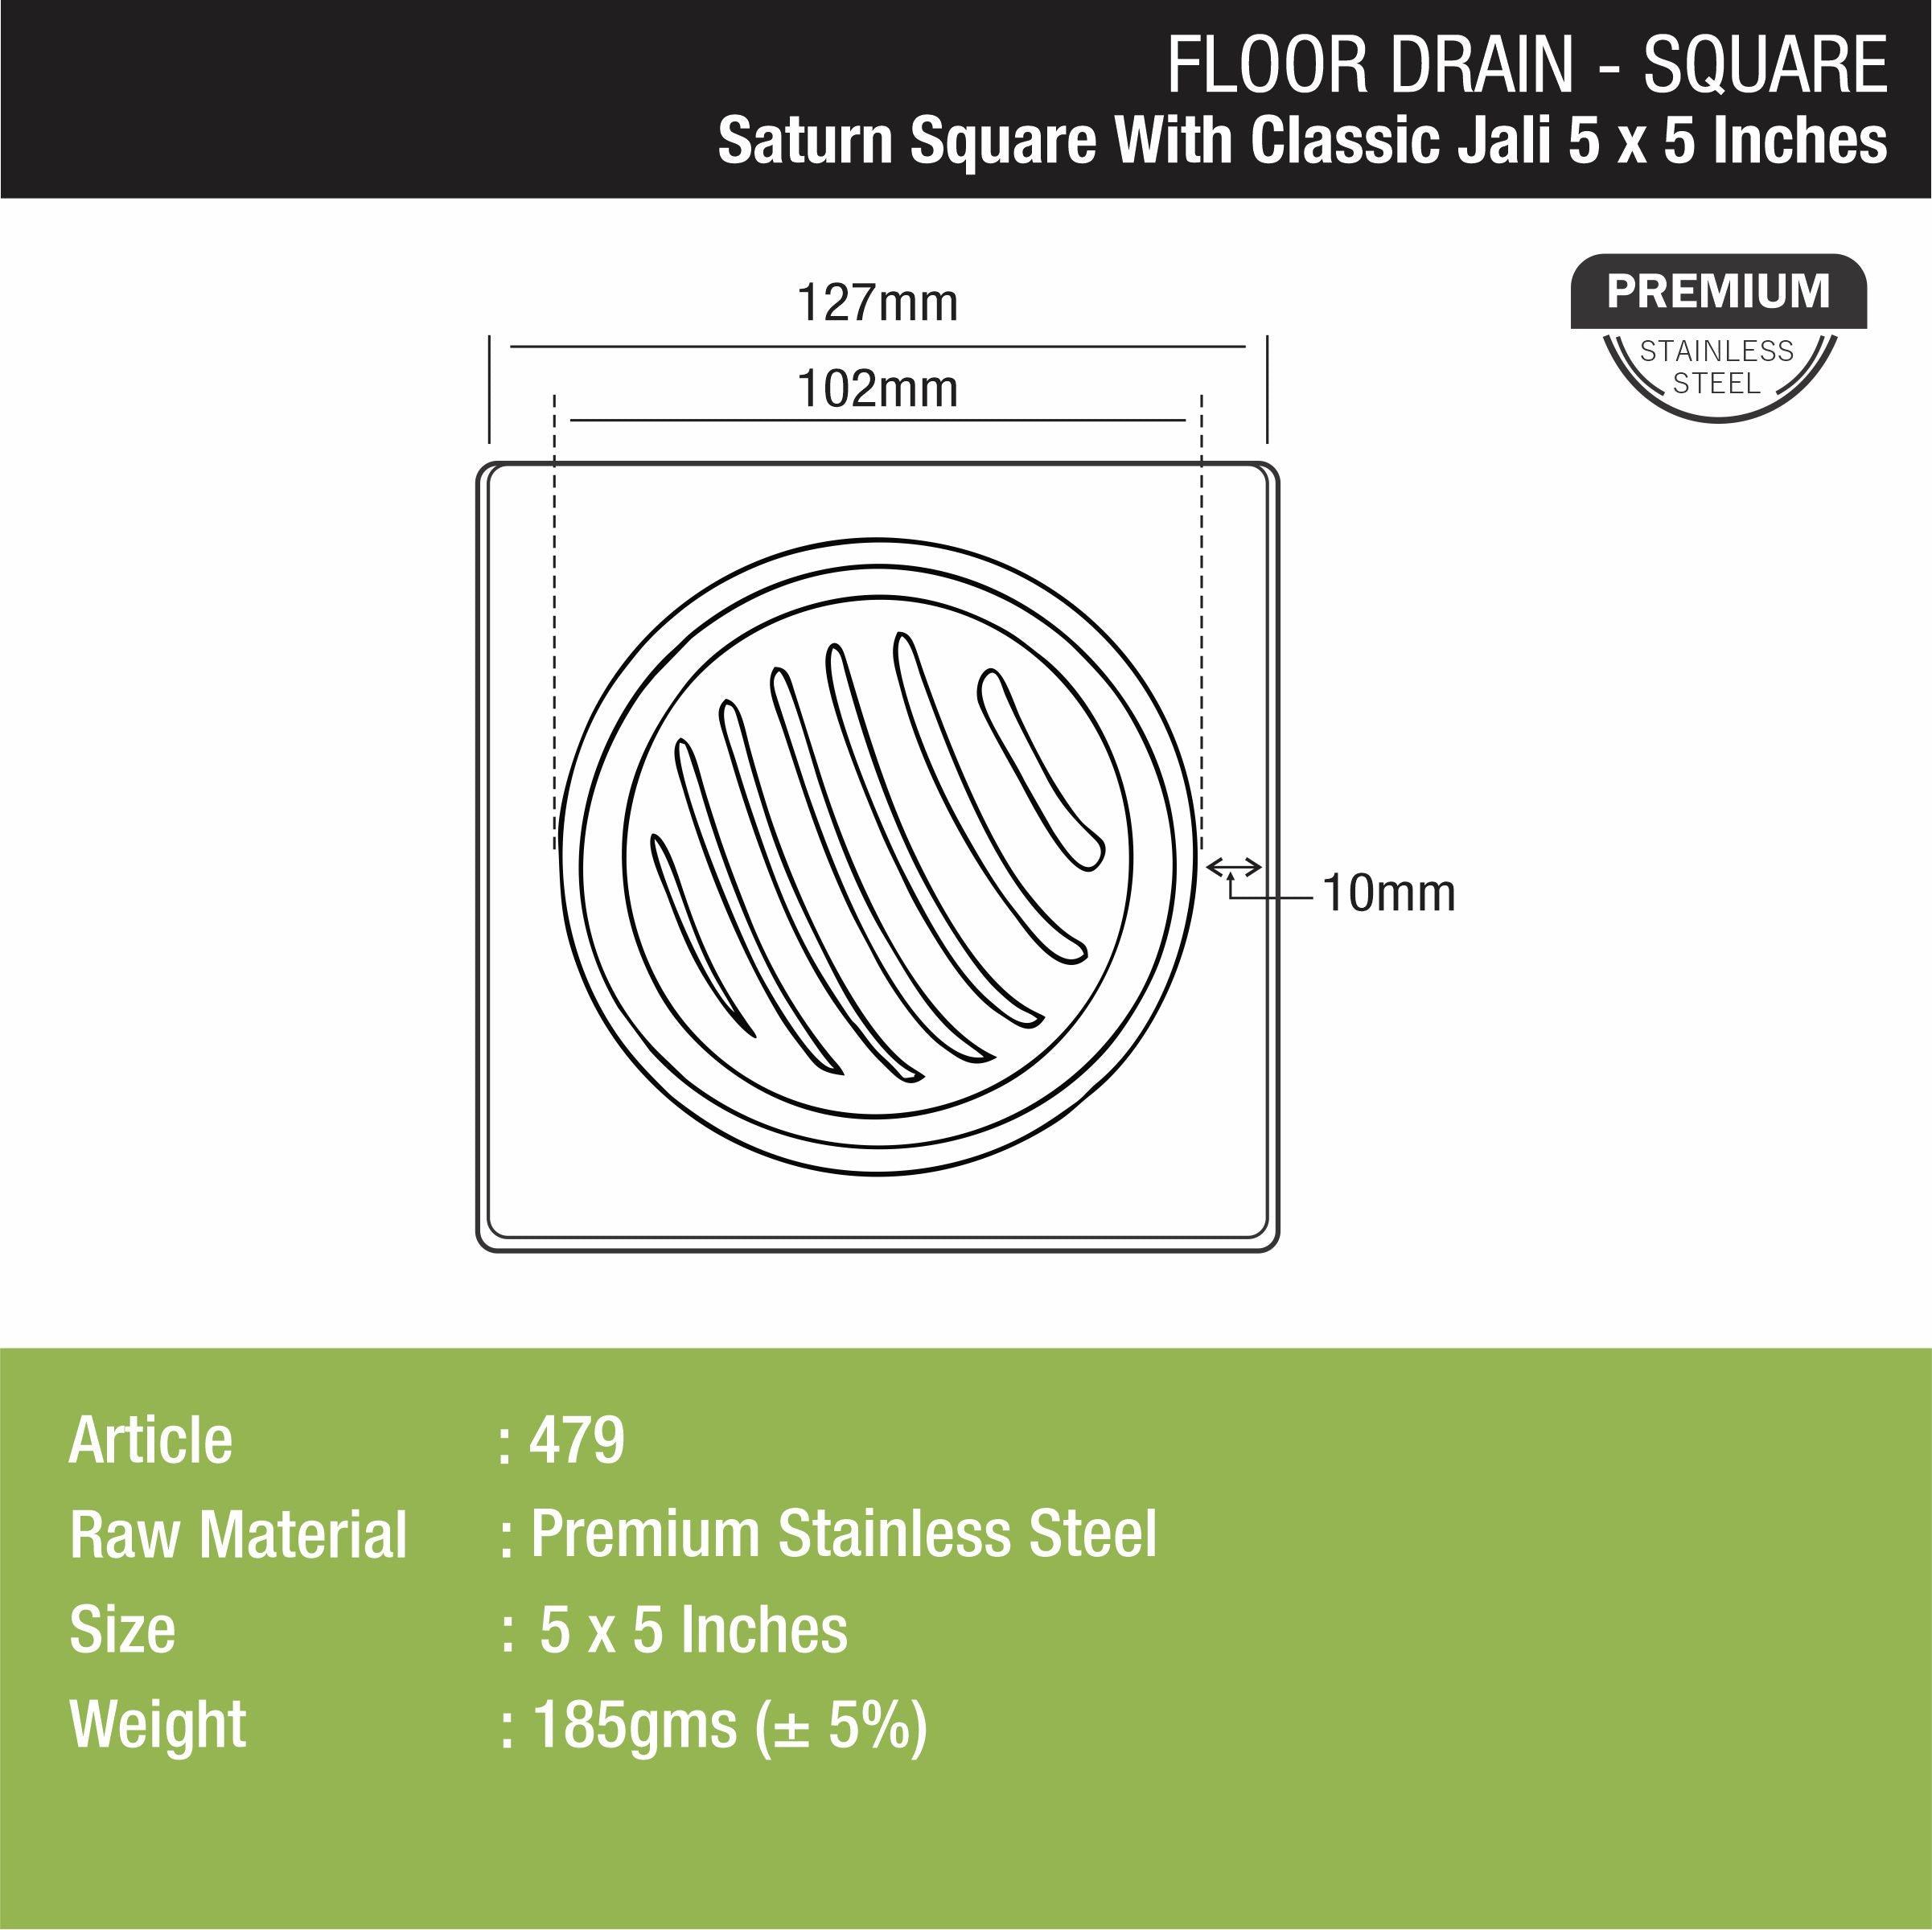 Saturn Square Floor Drain with Classic Jali  (5 x 5 Inches) - LIPKA